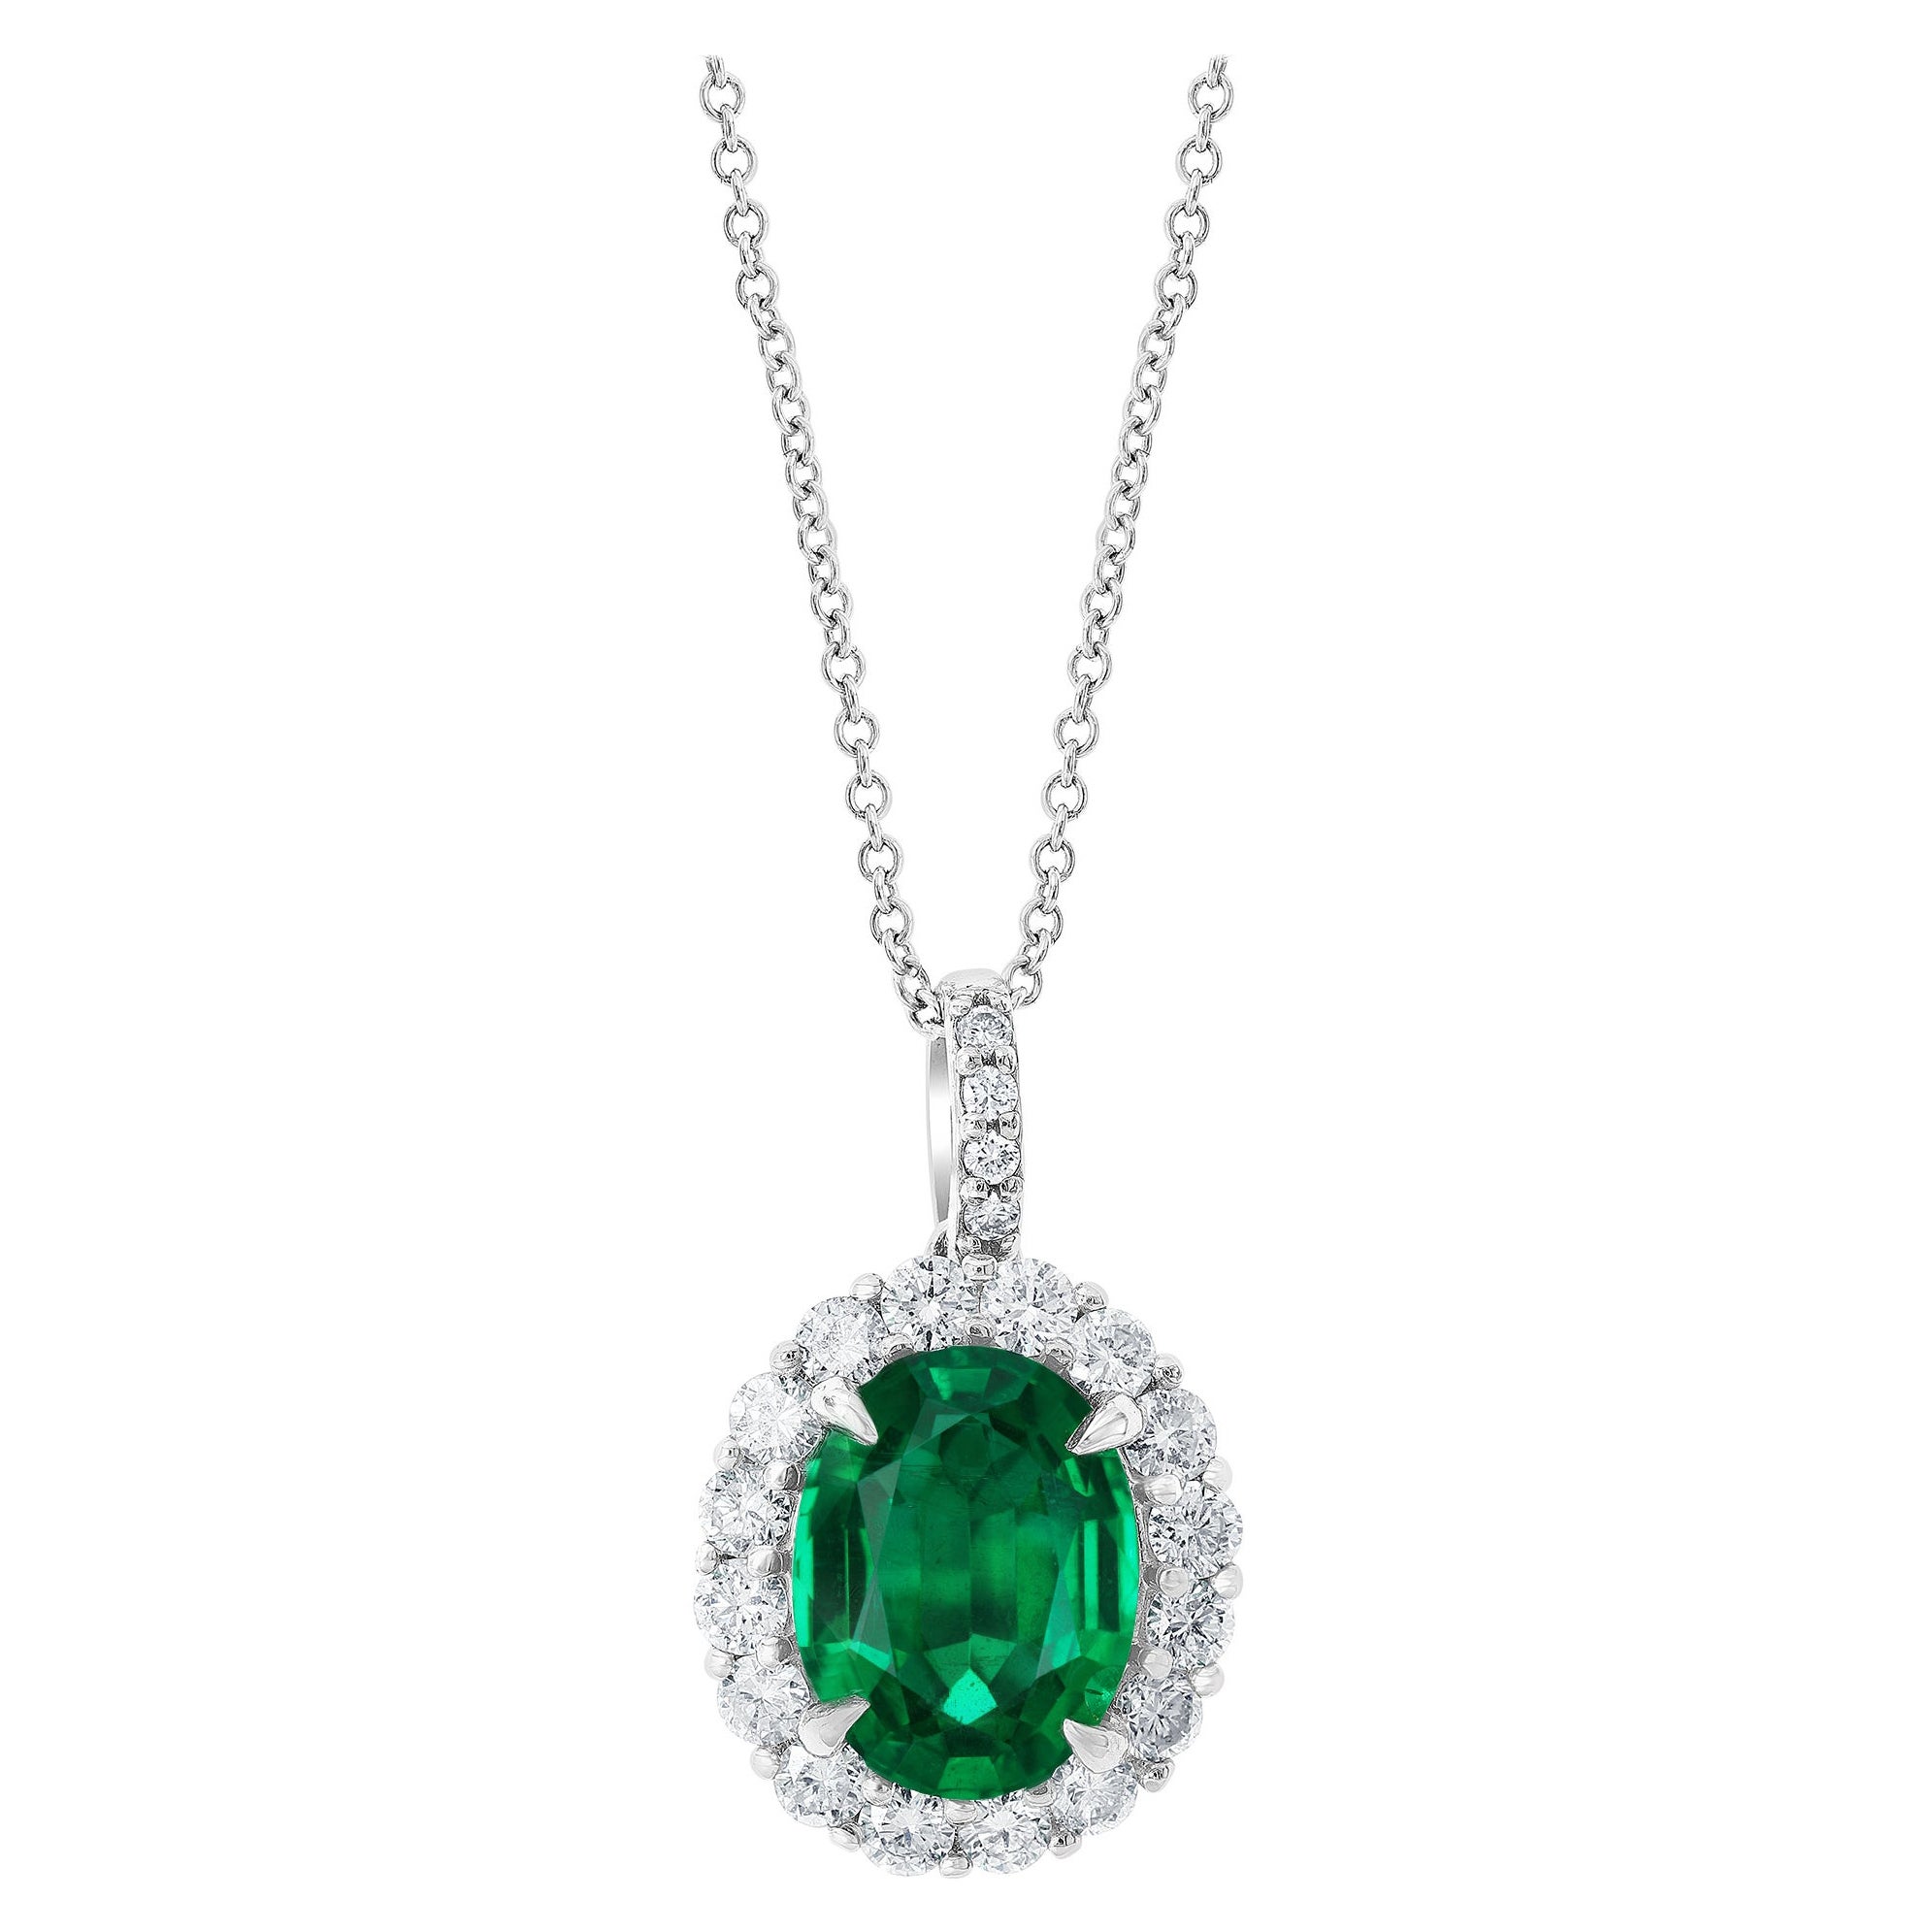 Auction - GIA Certified 3.53 Carat Oval Emerald and Diamond Pendant For Sale